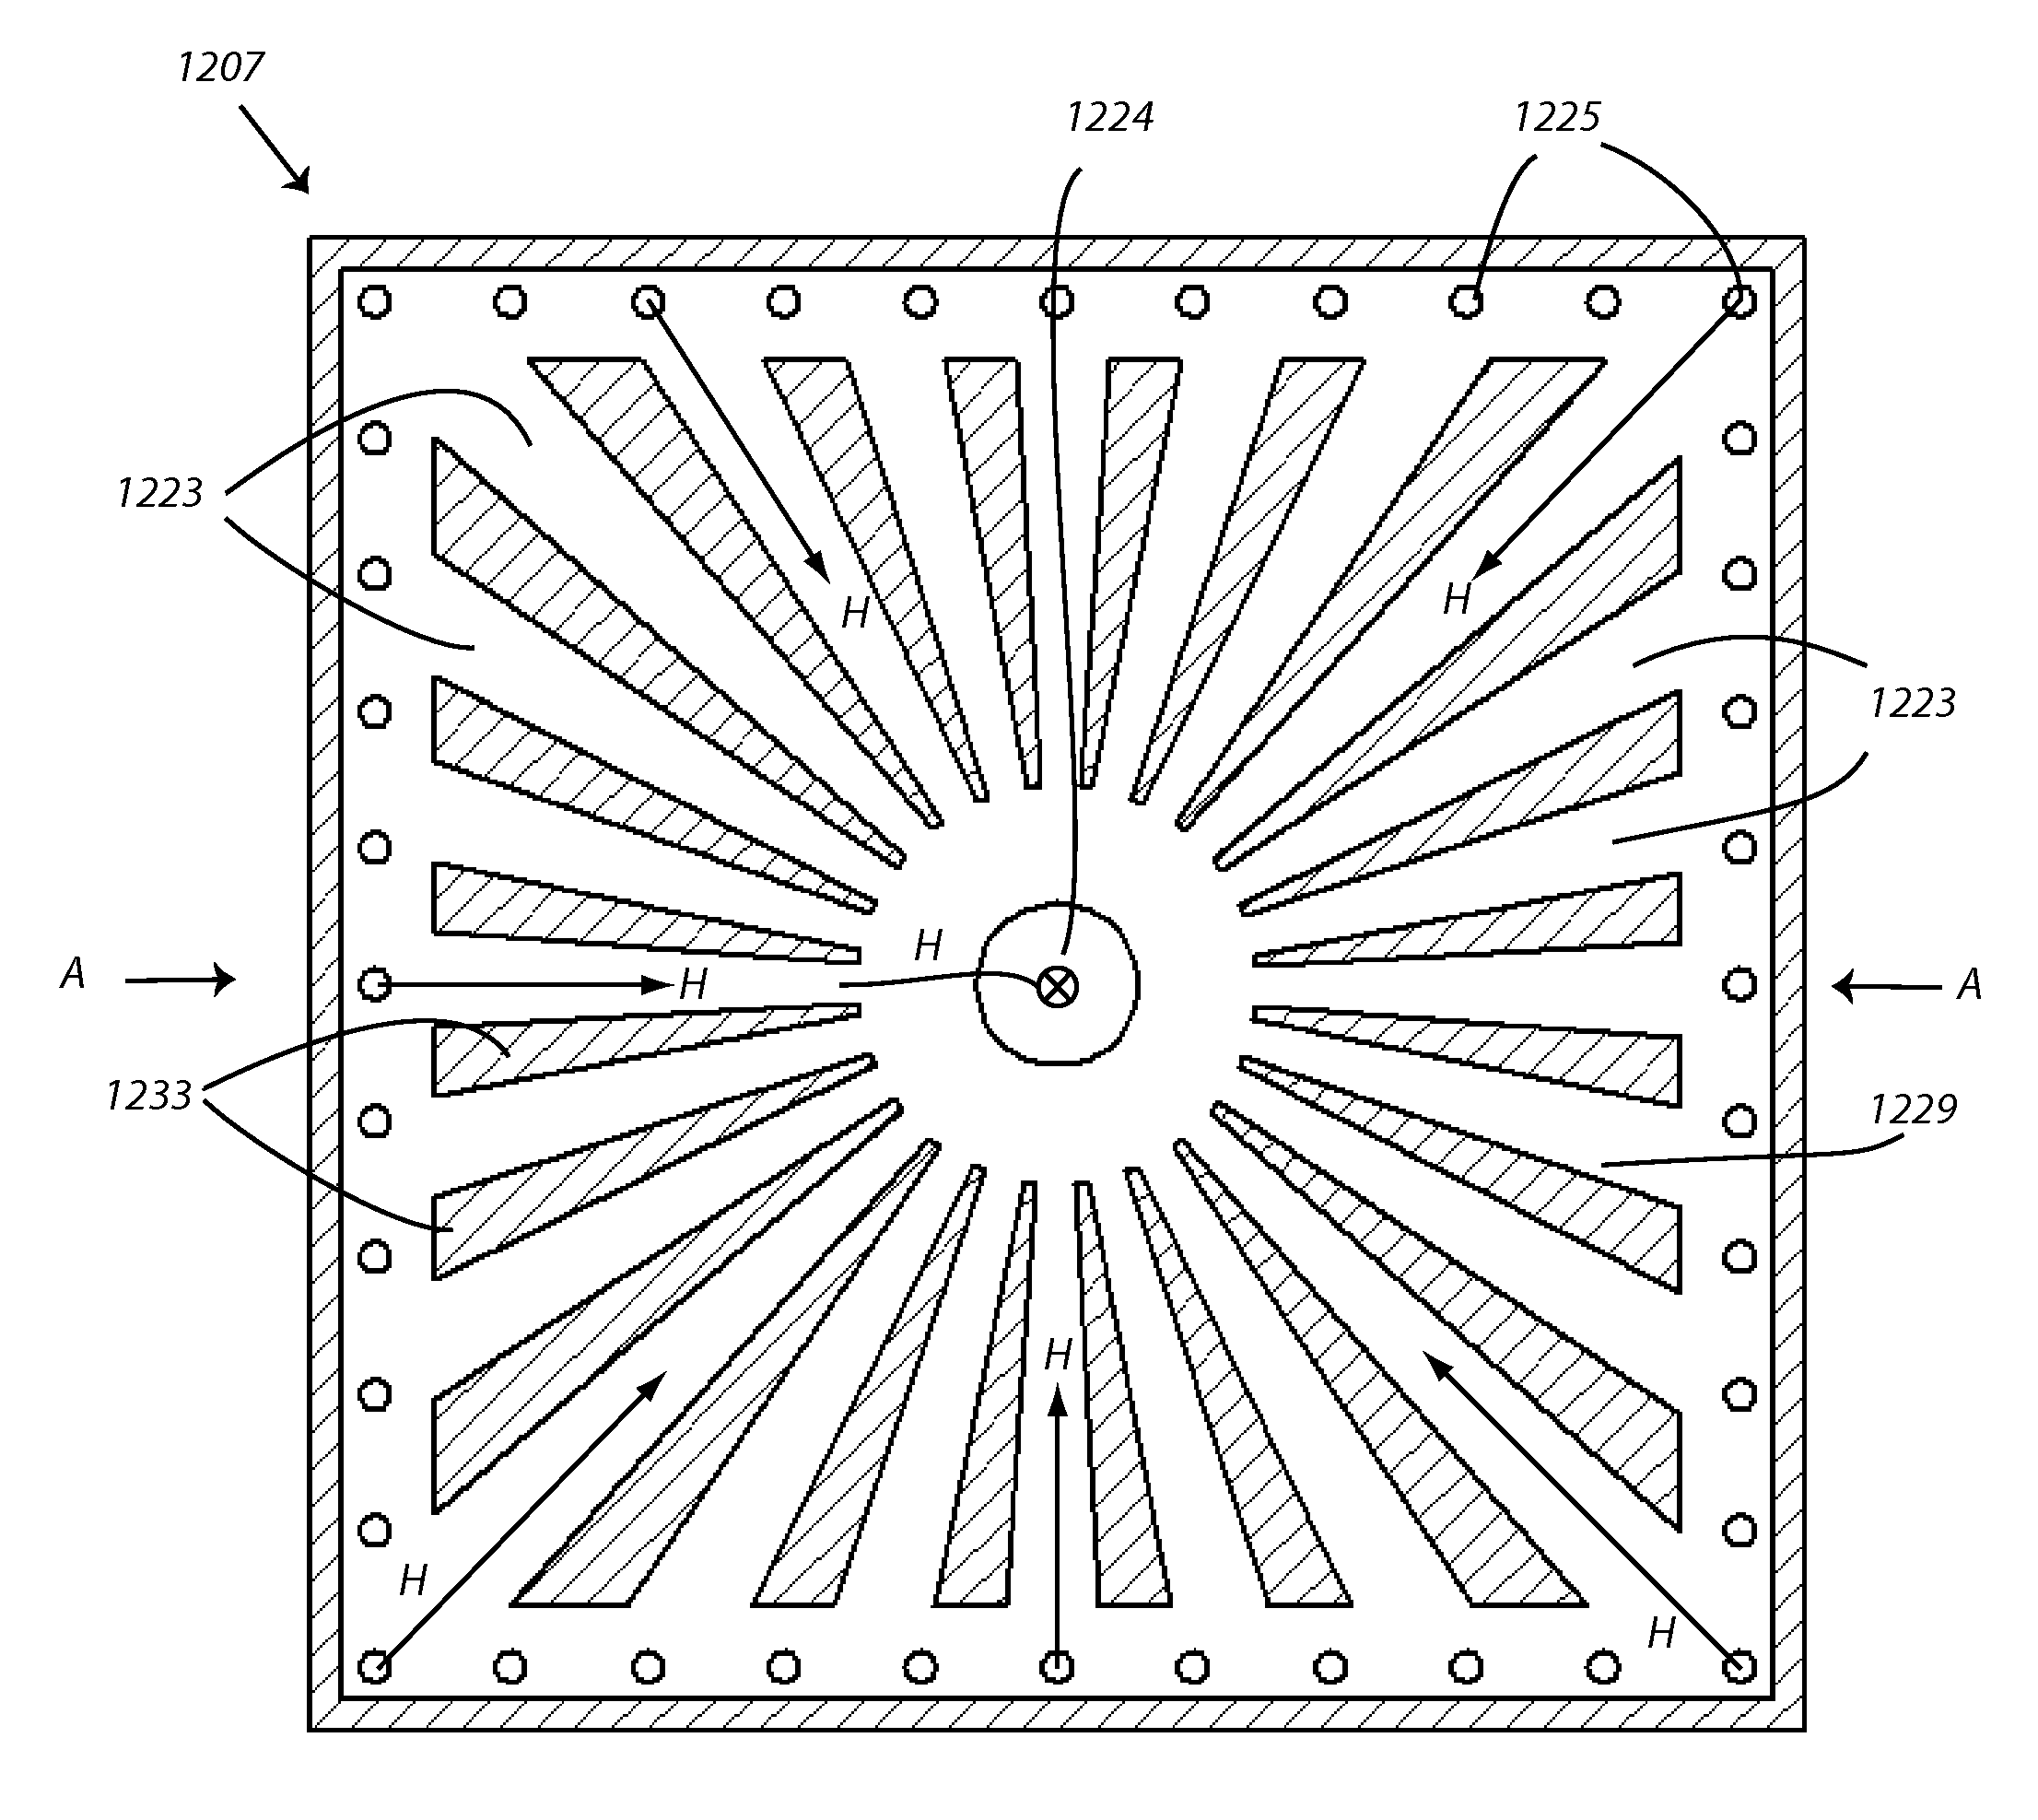 Methods and apparati for handling, heating and cooling a substrate upon which a pattern is made by a tool in heat flowable material coating, including substrate transport, tool laydown, tool tensioning and tool retraction